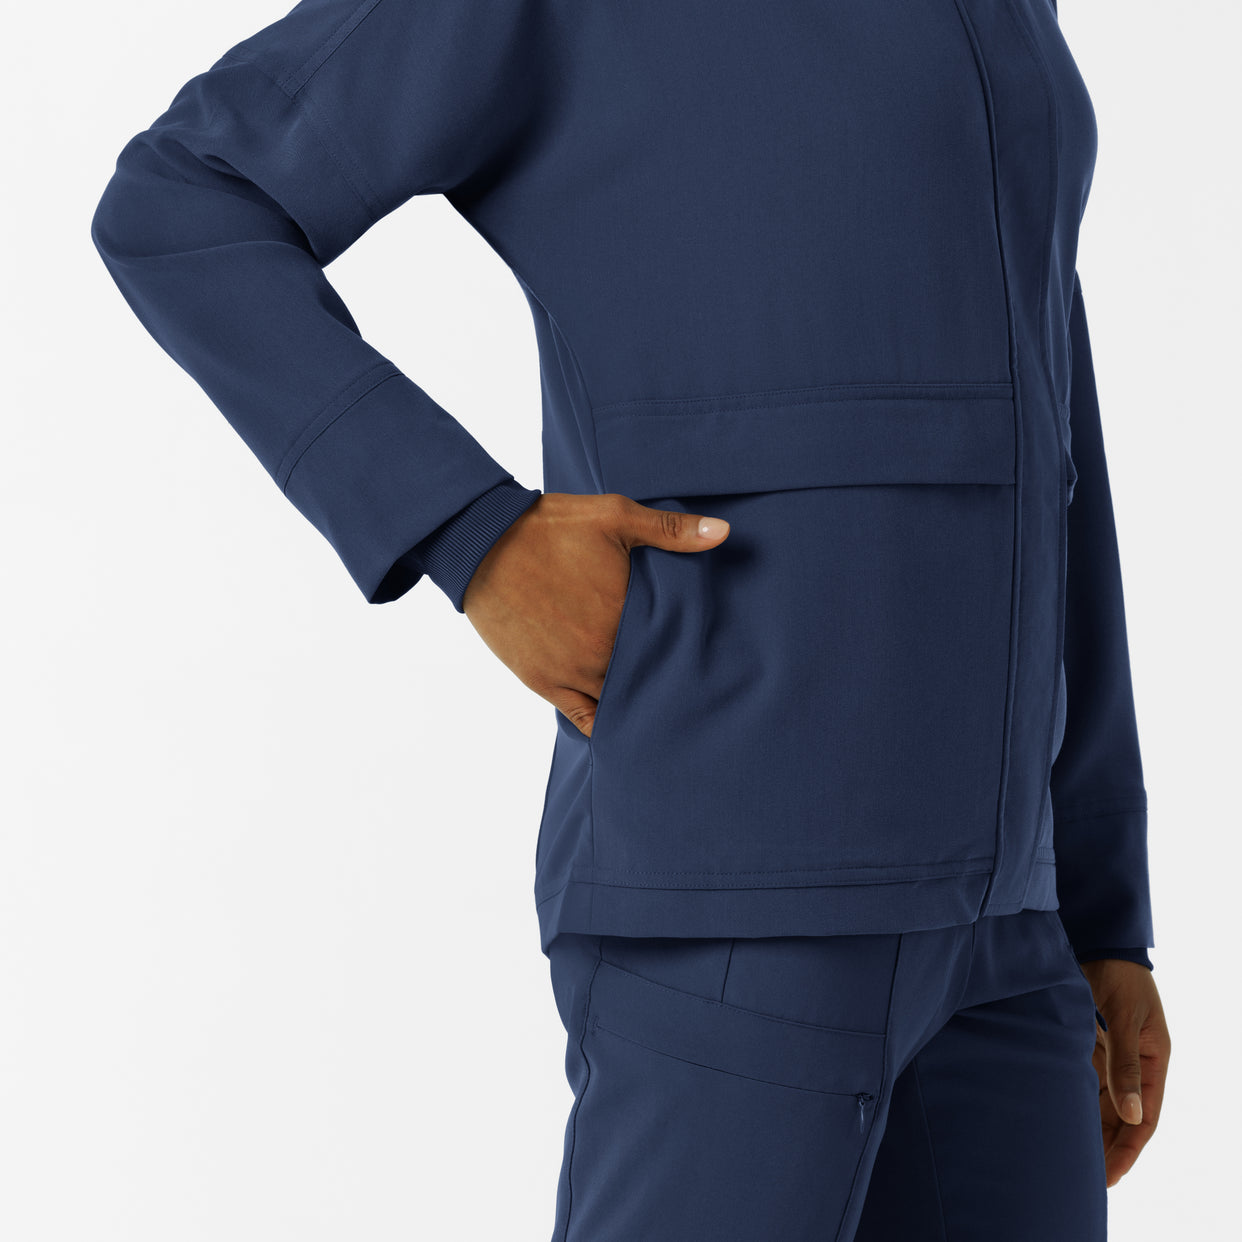 Knits and Layers Women's Germs Happen Packable Scrub Jacket Navy back detail